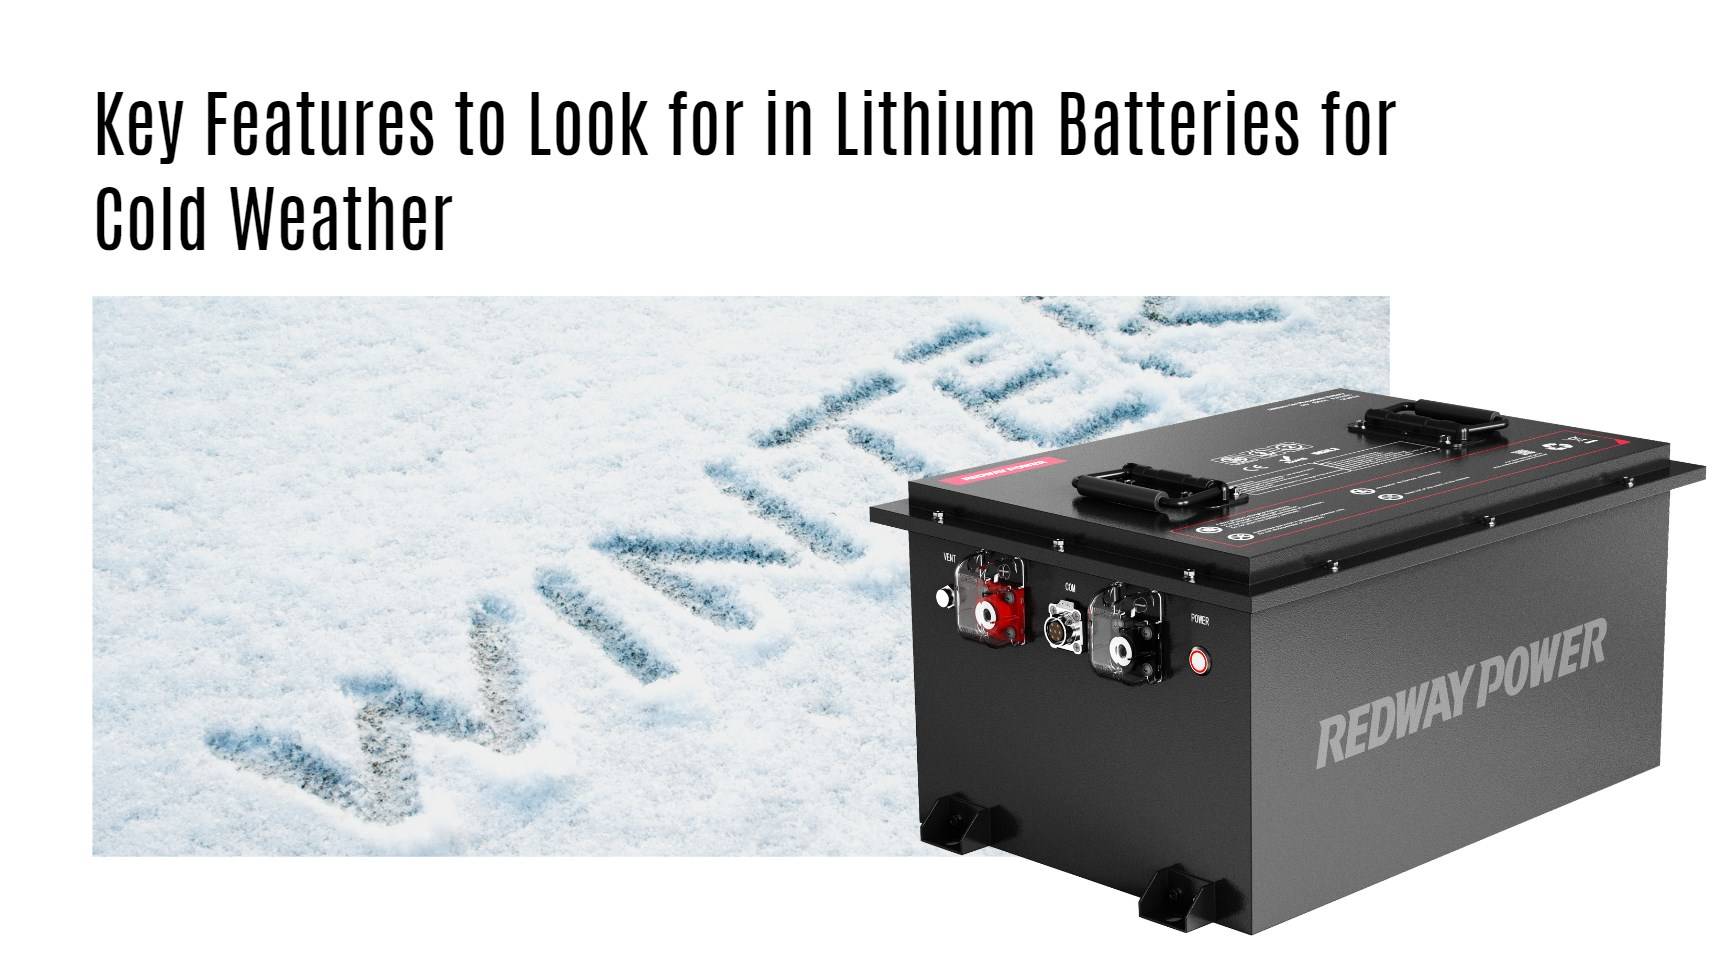 Key Features to Look for in Lithium Batteries for Cold Weather 48v 100ah golf cart lithium battery factory manufacturer oem lifepo4 lfp